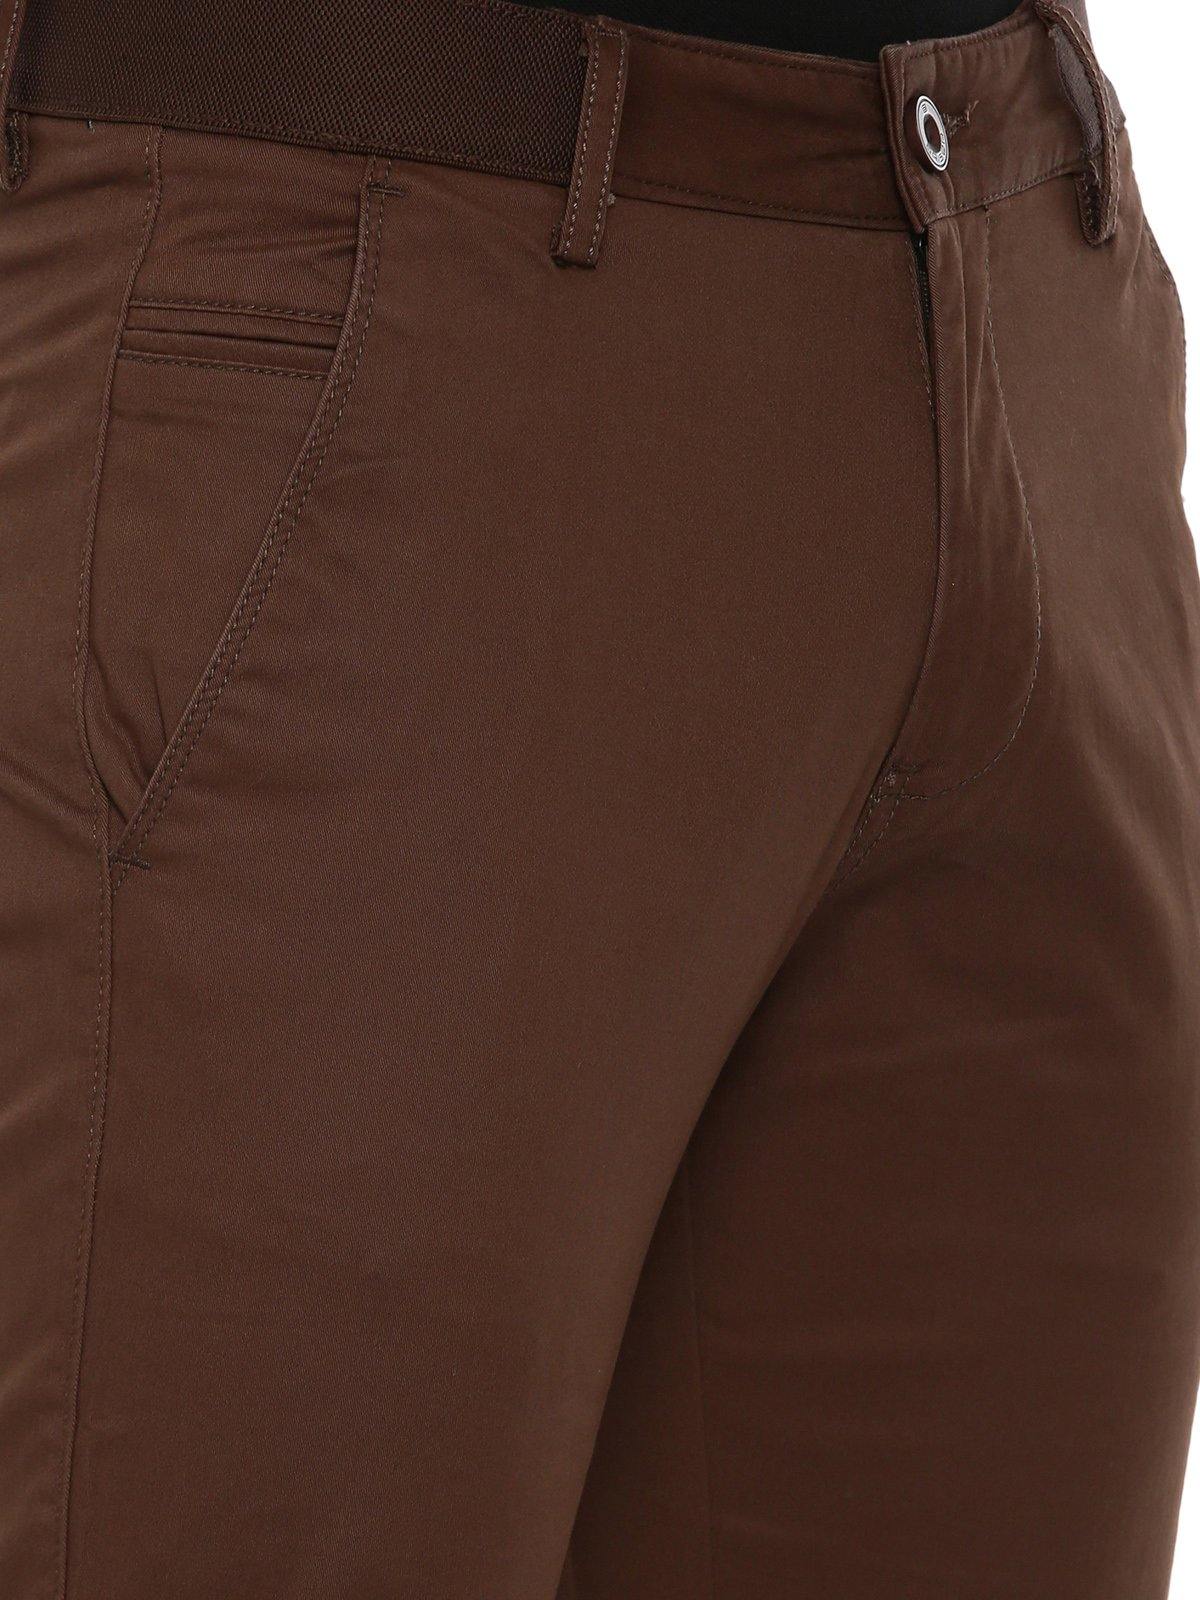 Classic Coffee Brown Wool-Mix Pants for Men